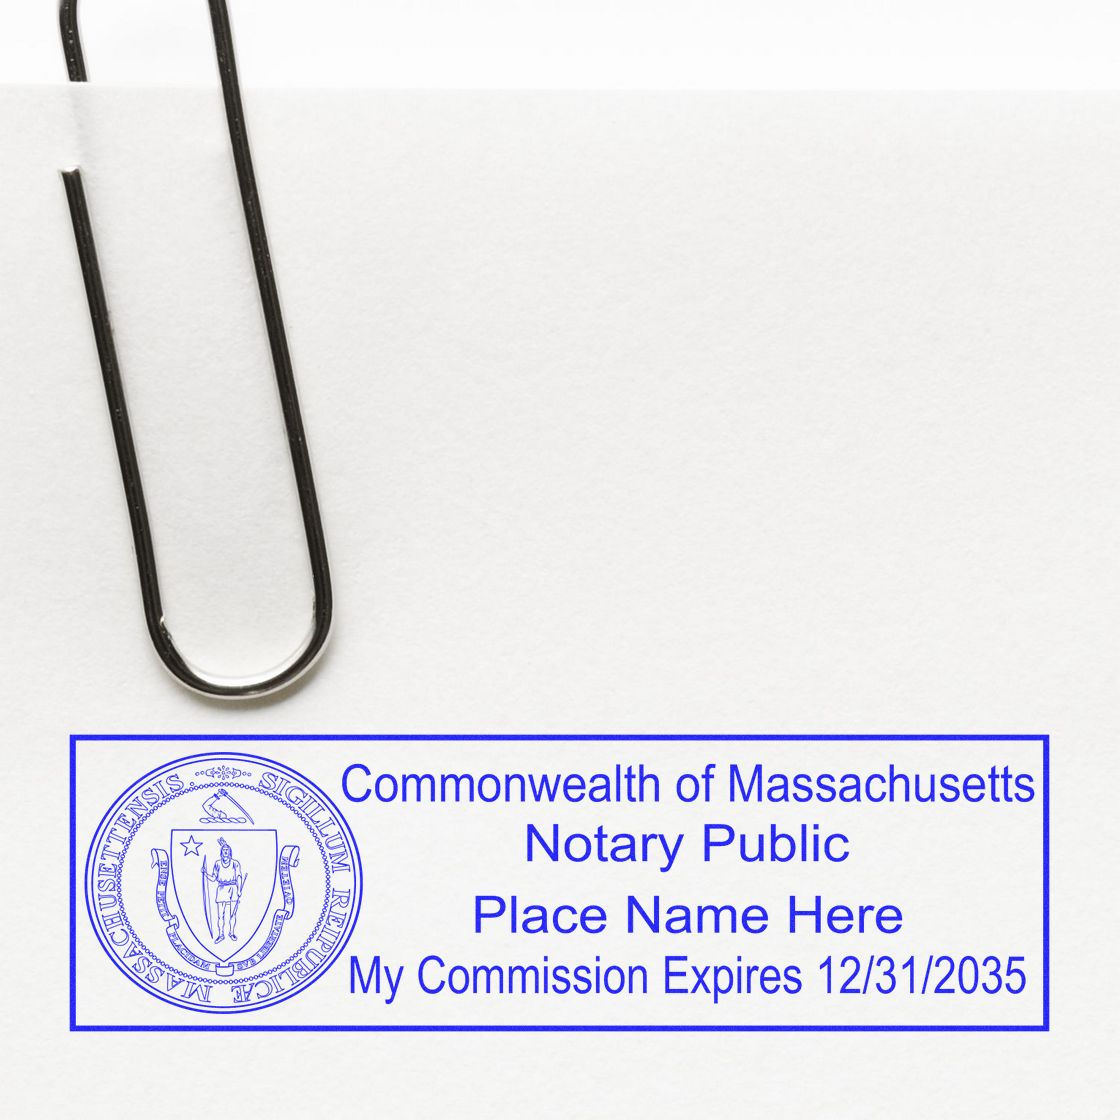 Slim Pre-Inked State Seal Notary Stamp for Massachusetts in use photo showing a stamped imprint of the Slim Pre-Inked State Seal Notary Stamp for Massachusetts